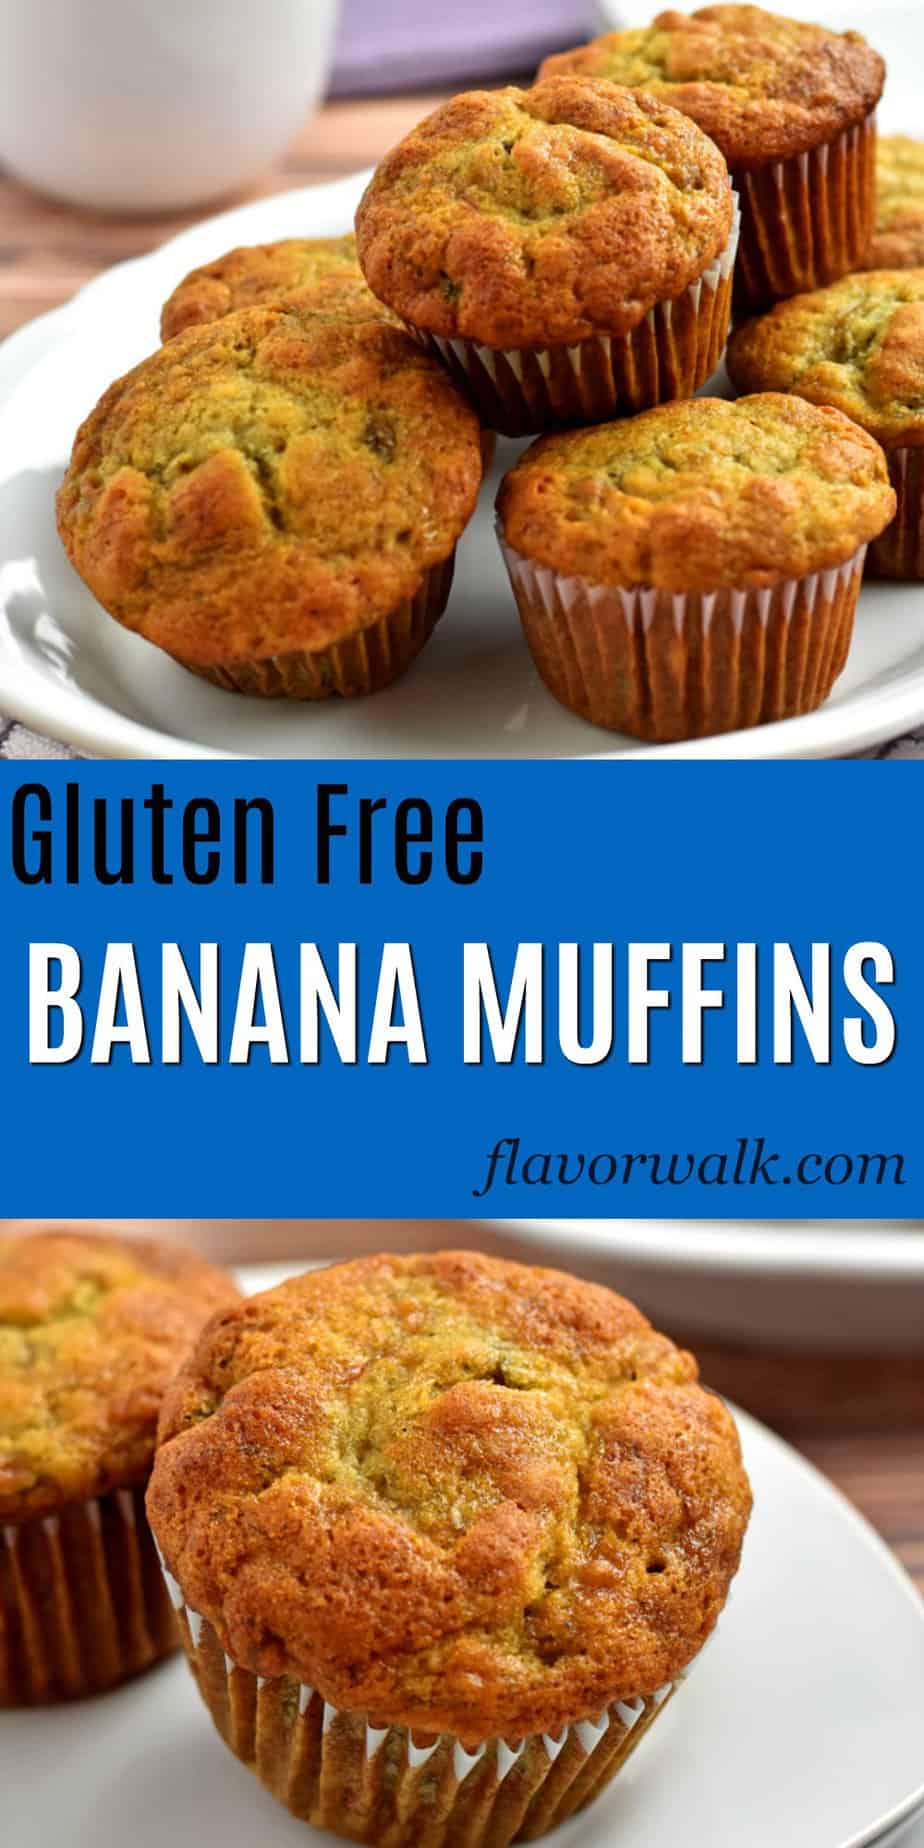 top image is a stack of gluten free banana muffins on white plate, bottom image is a close up of a banana muffin with blue text overlay between the images